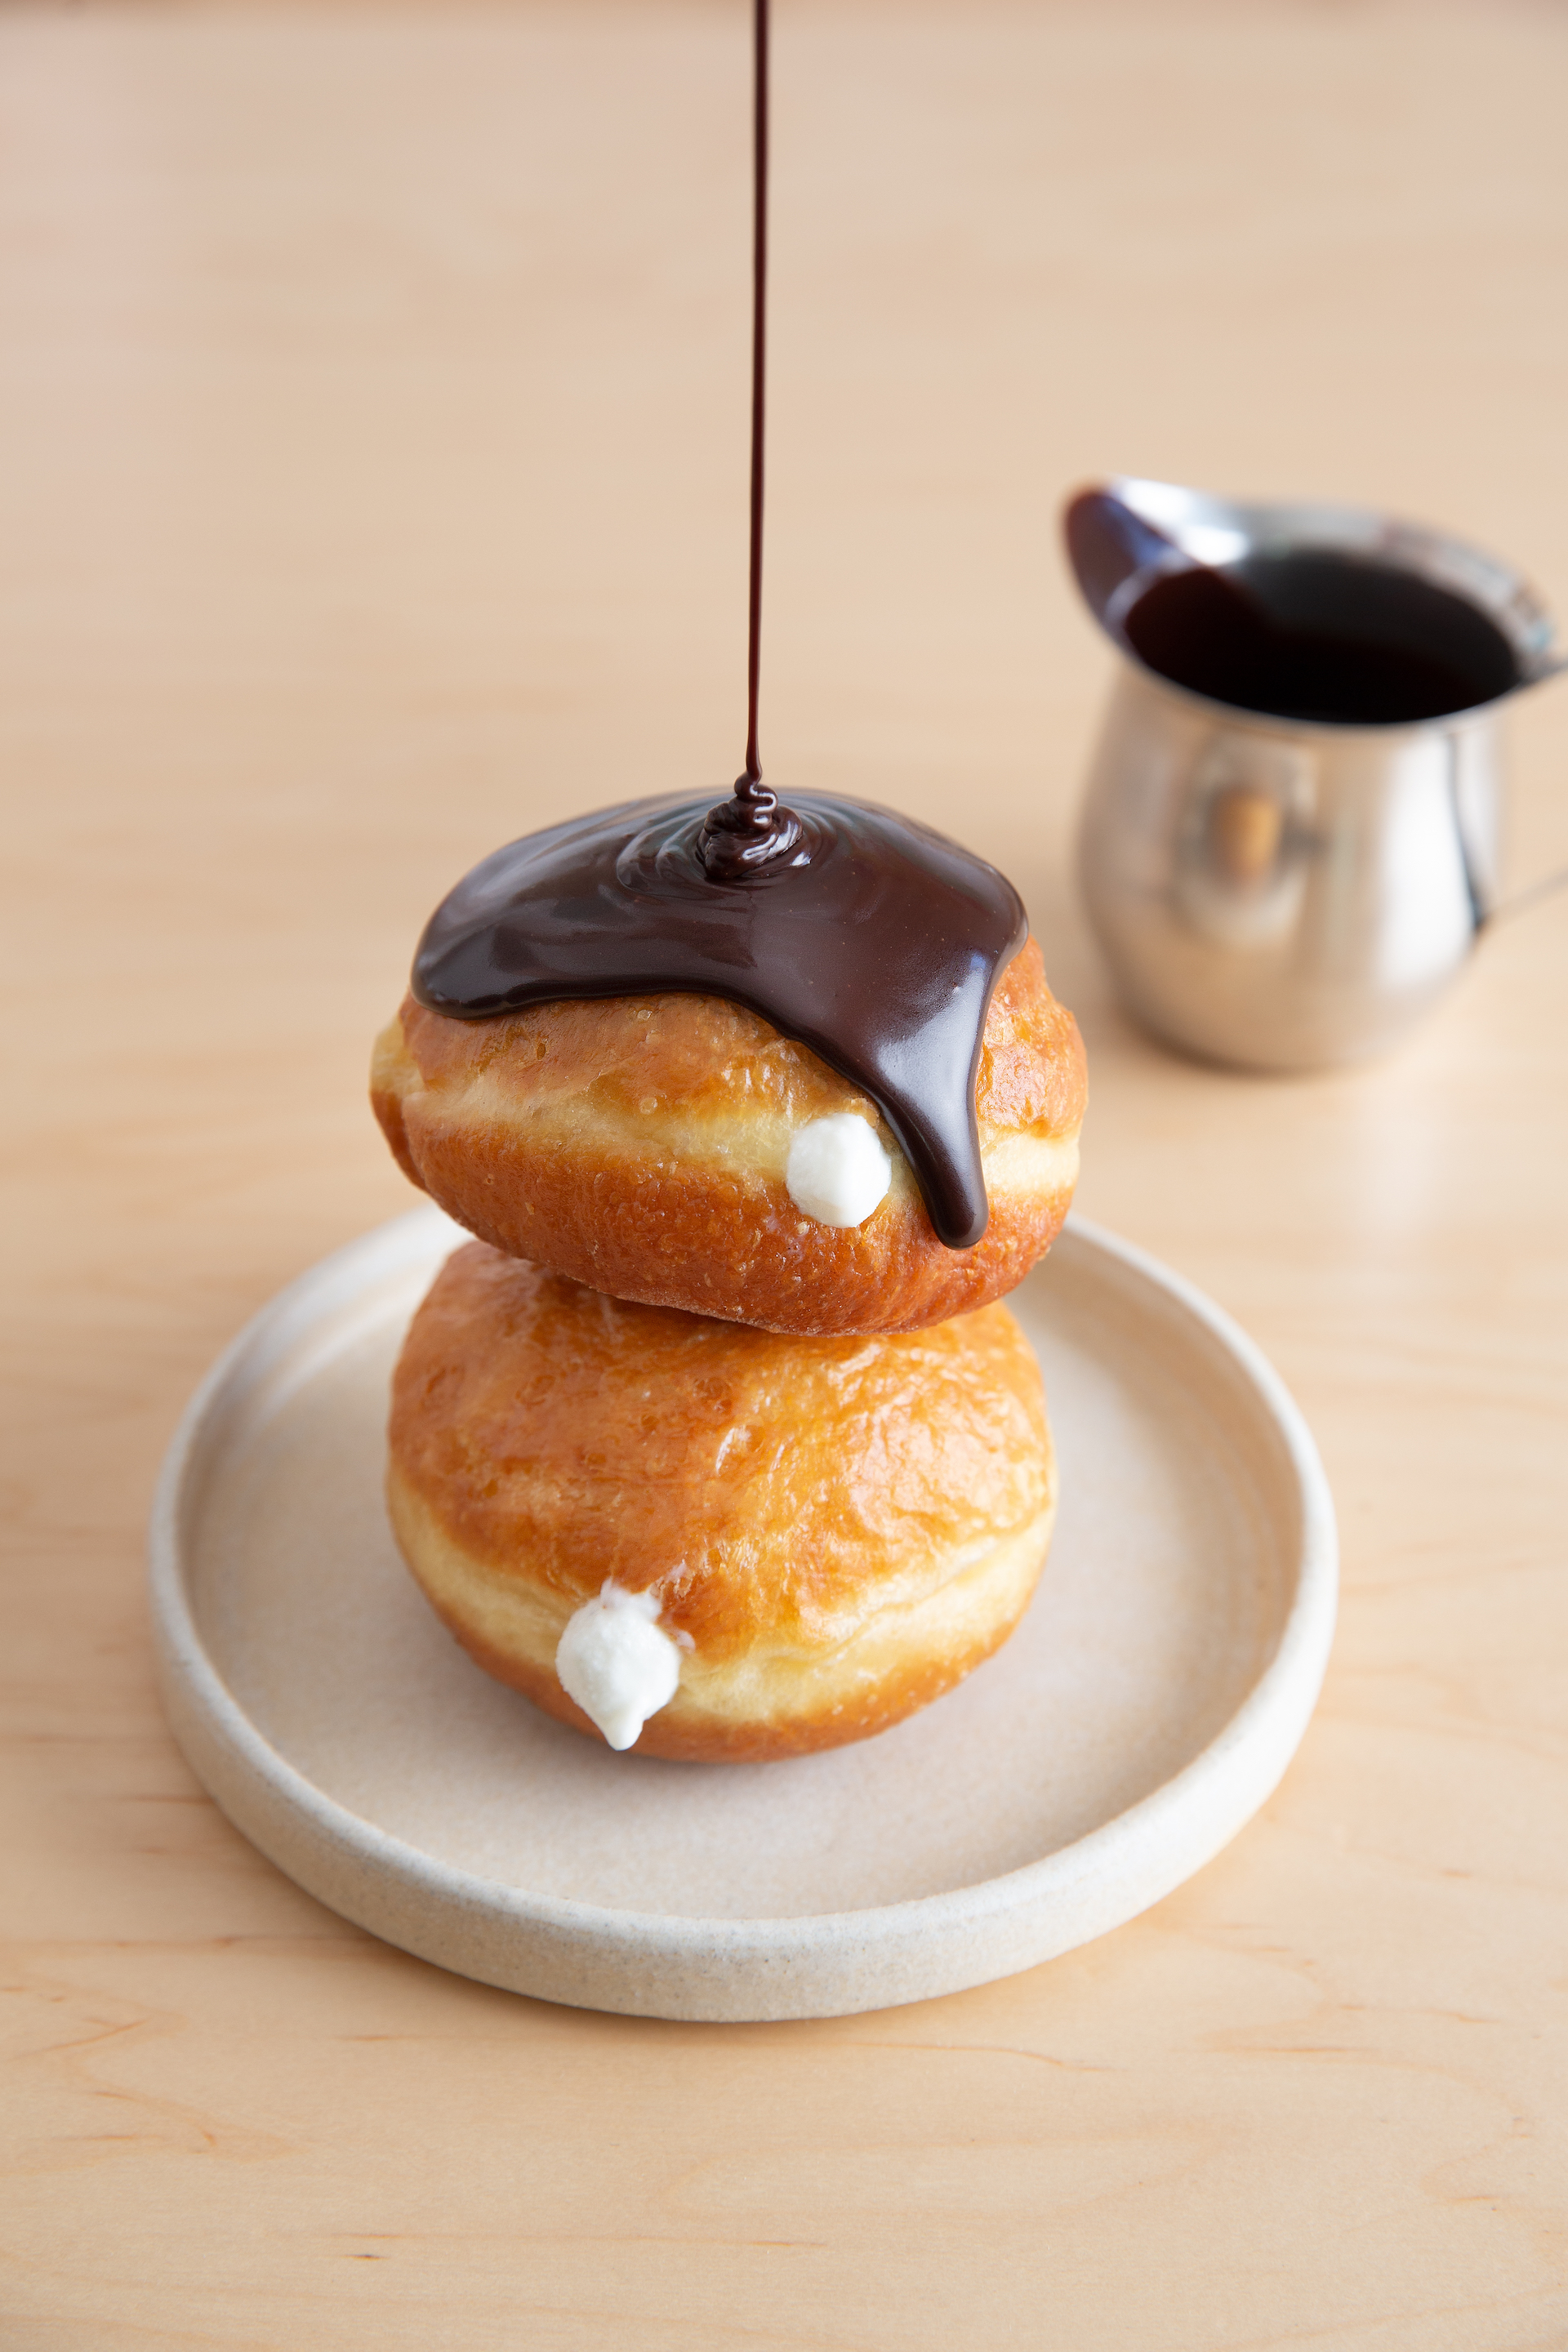 The new Soft Serve Stuffed Donuts feature brioche donuts from Mr. Holmes Bakehouse.